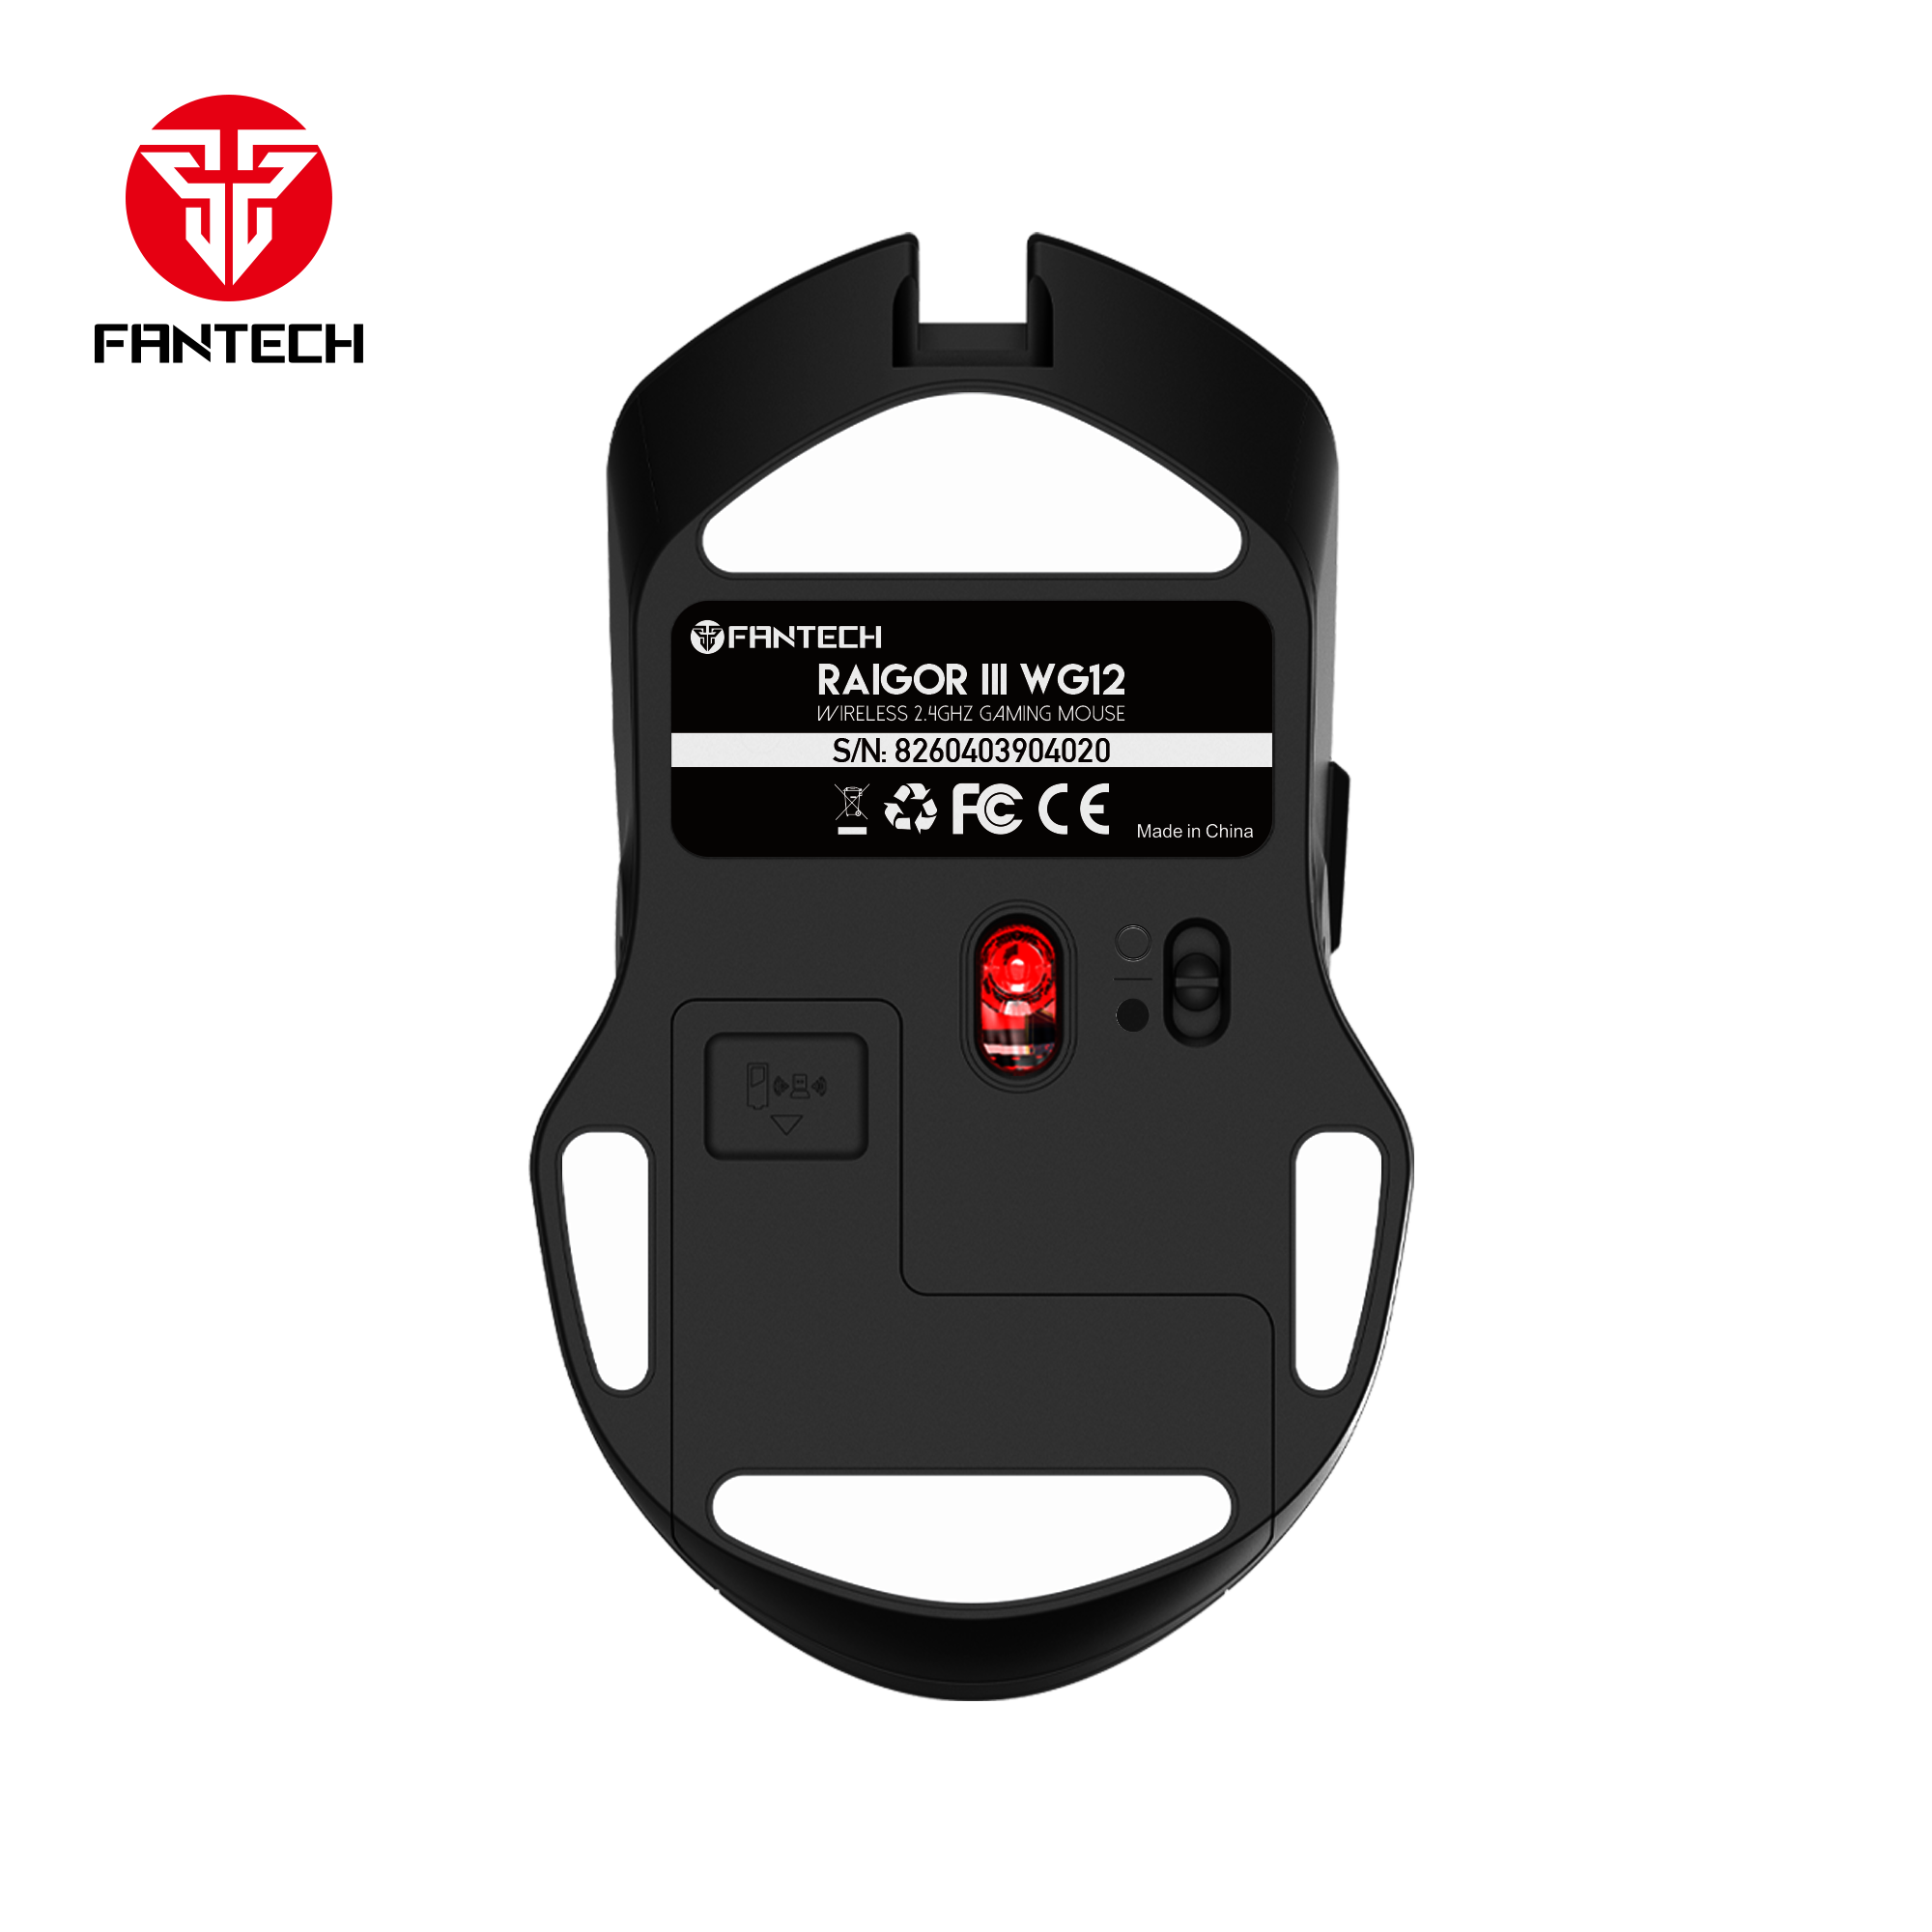 Fantech Raigor III WG12 Gaming Mouse With 2.4GHz Wireless Connection Mouse 12